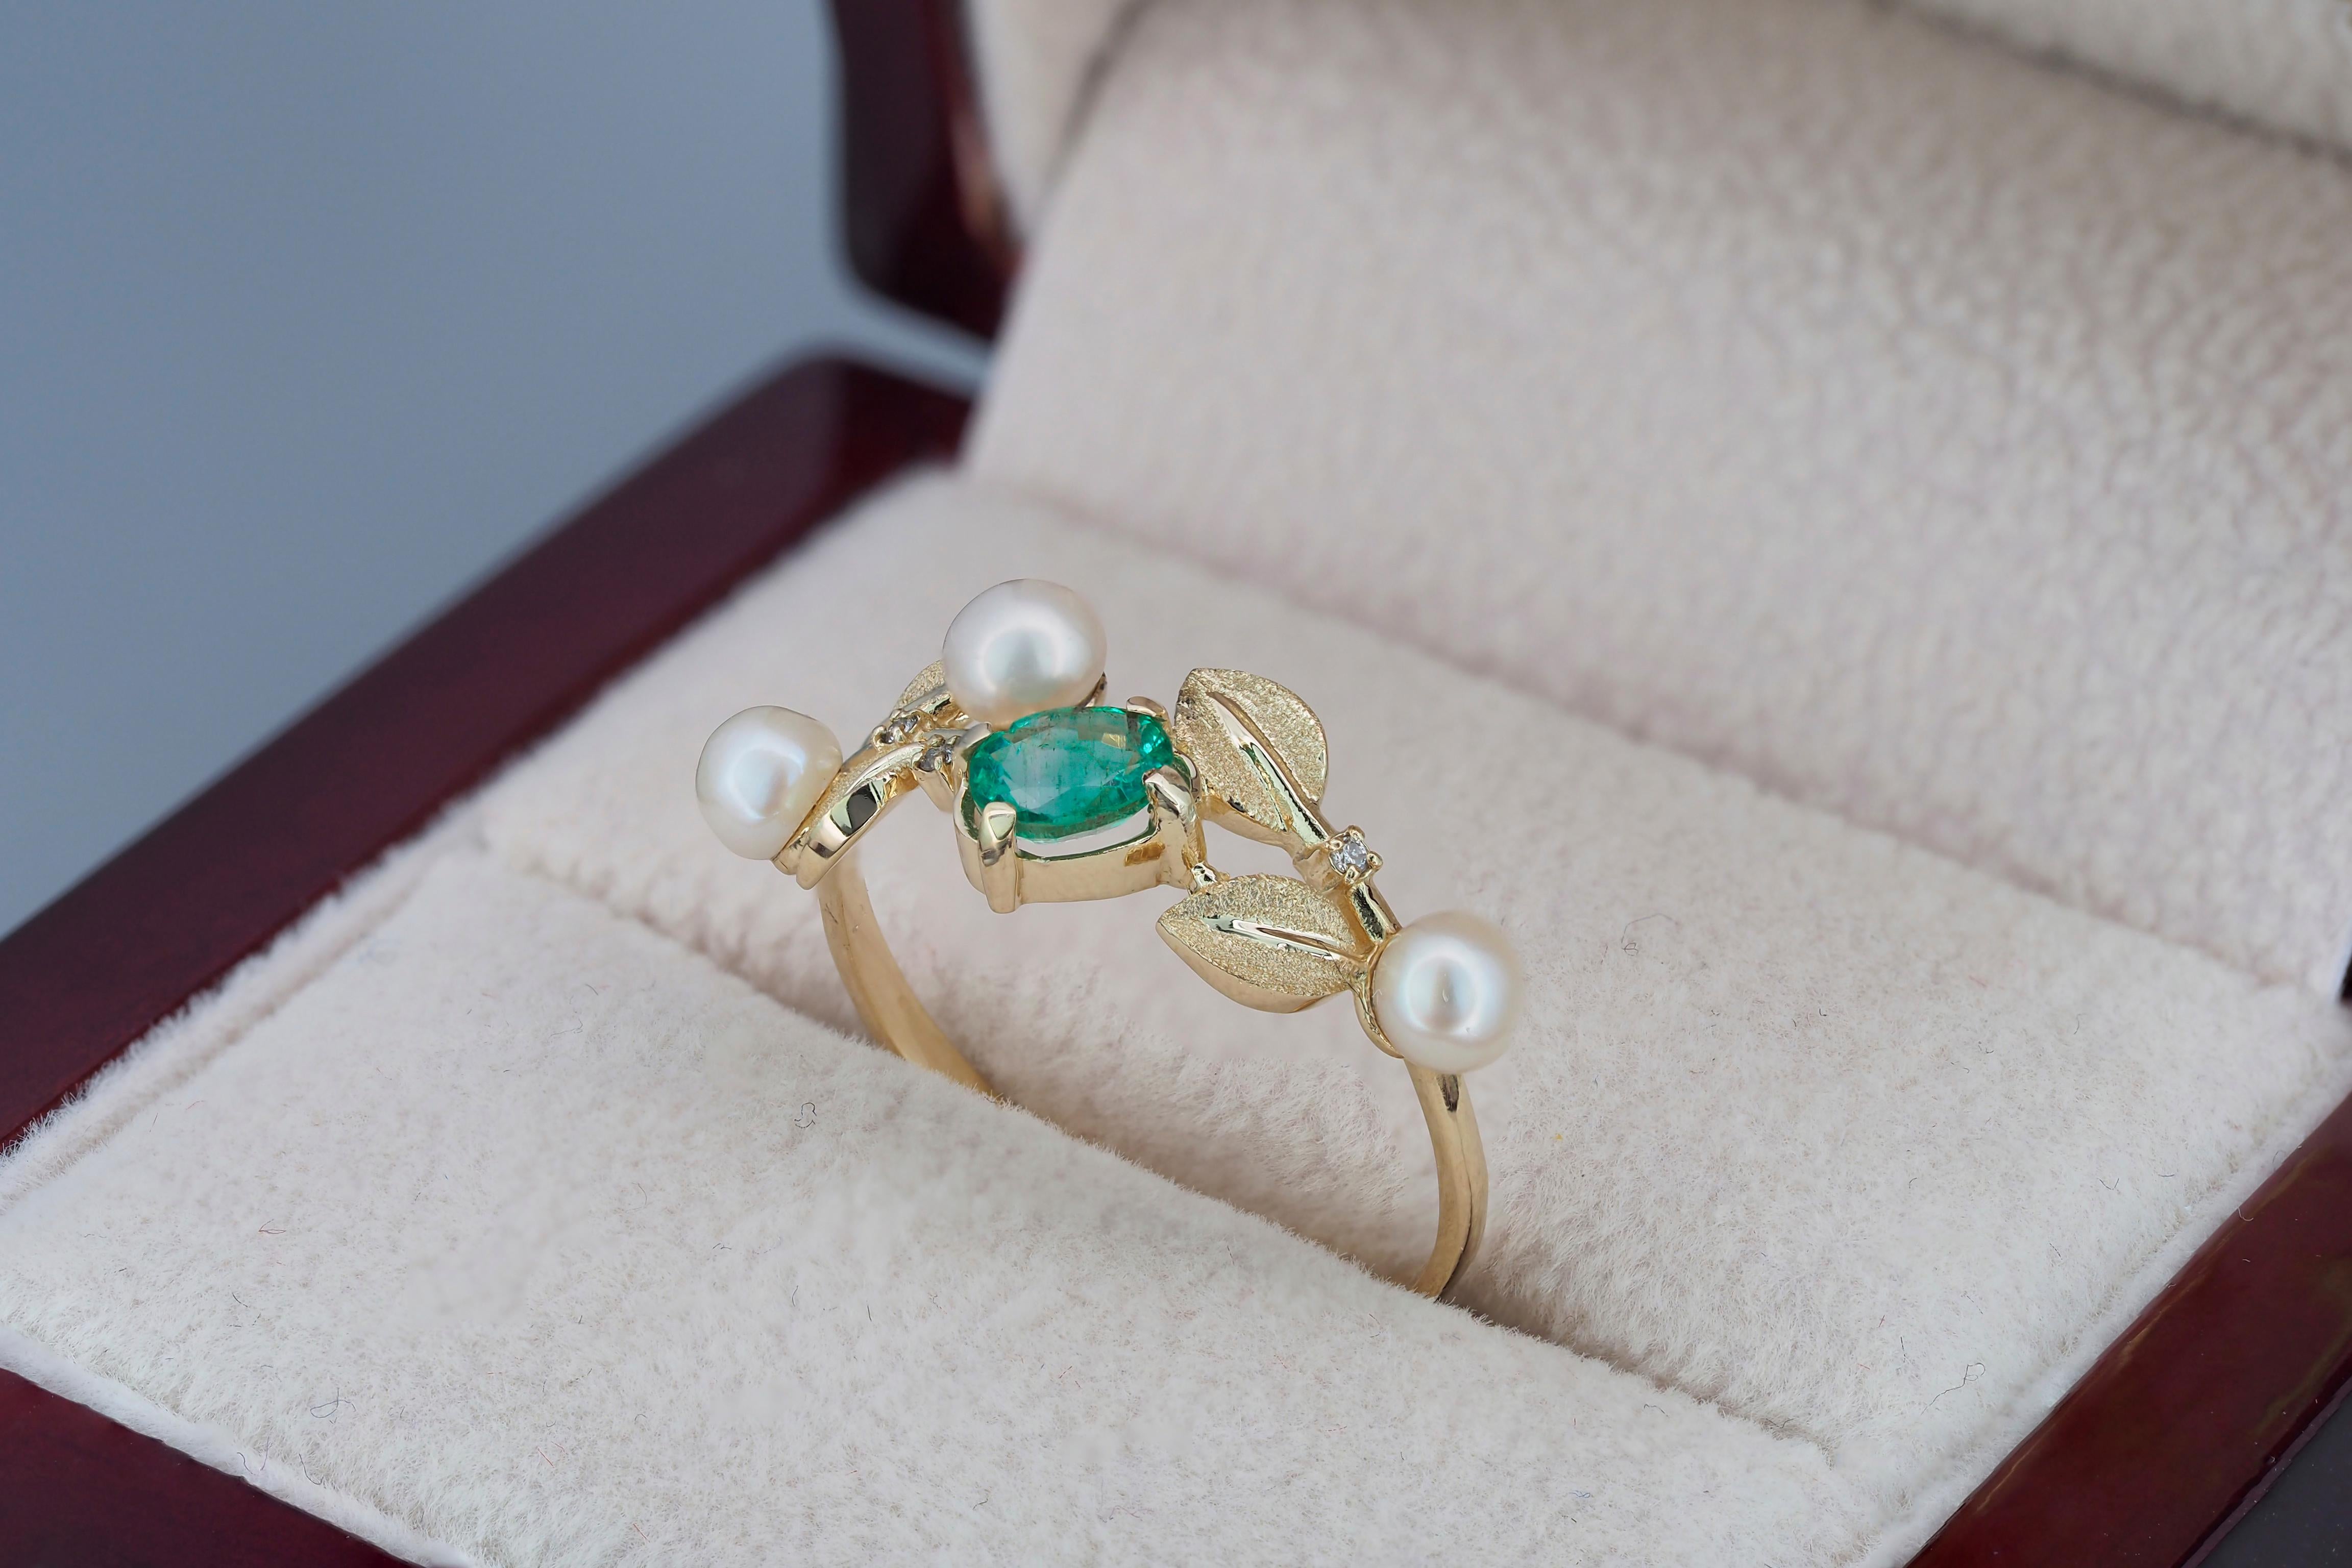 For Sale:  14k Gold Ring with Emerald, Pearls and Diamonds 7